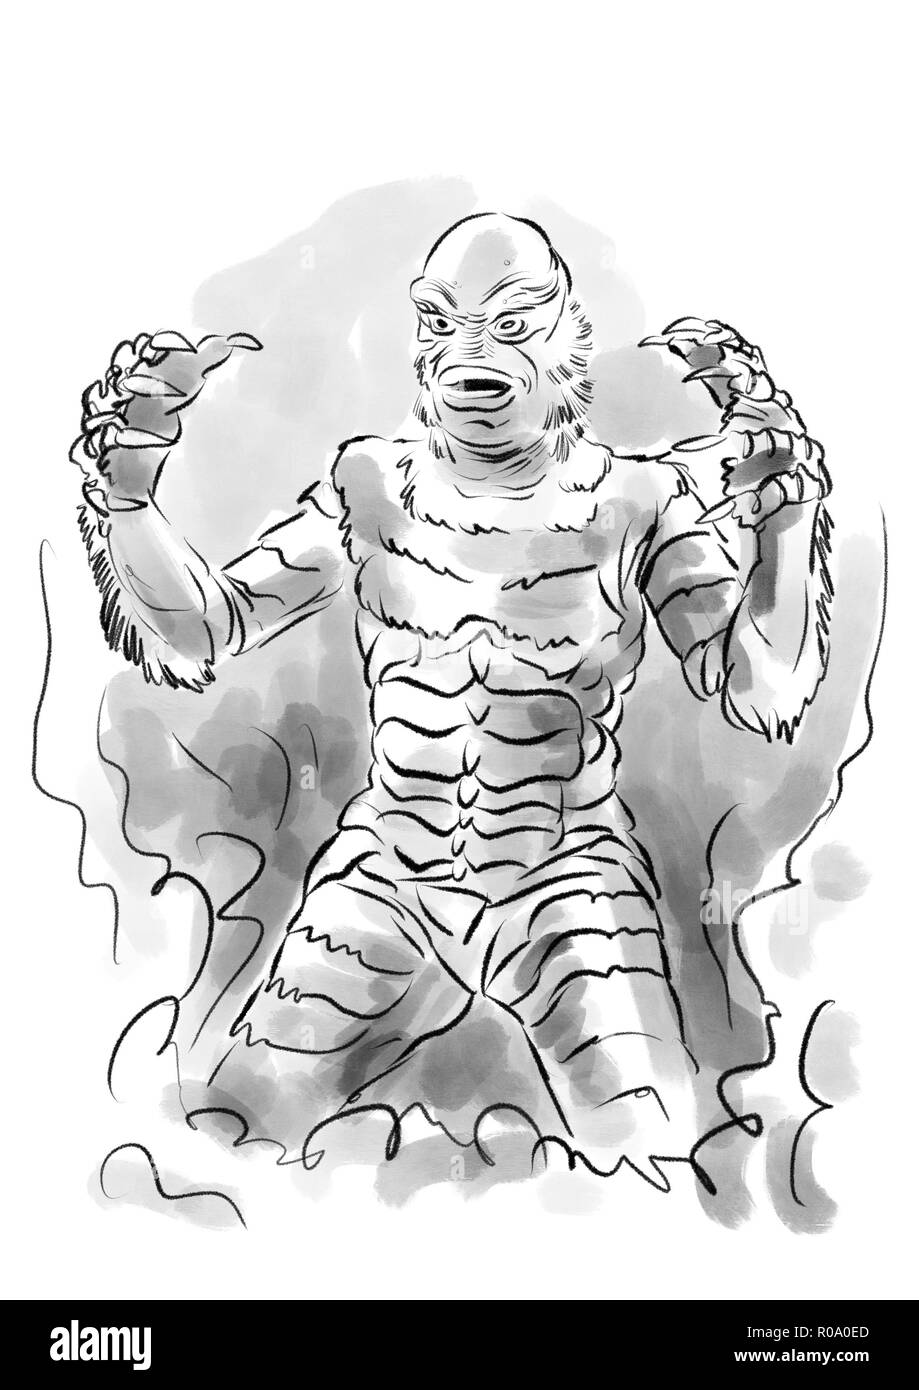 illustration of gillman from the creature from the black lagoon film movie Stock Photo